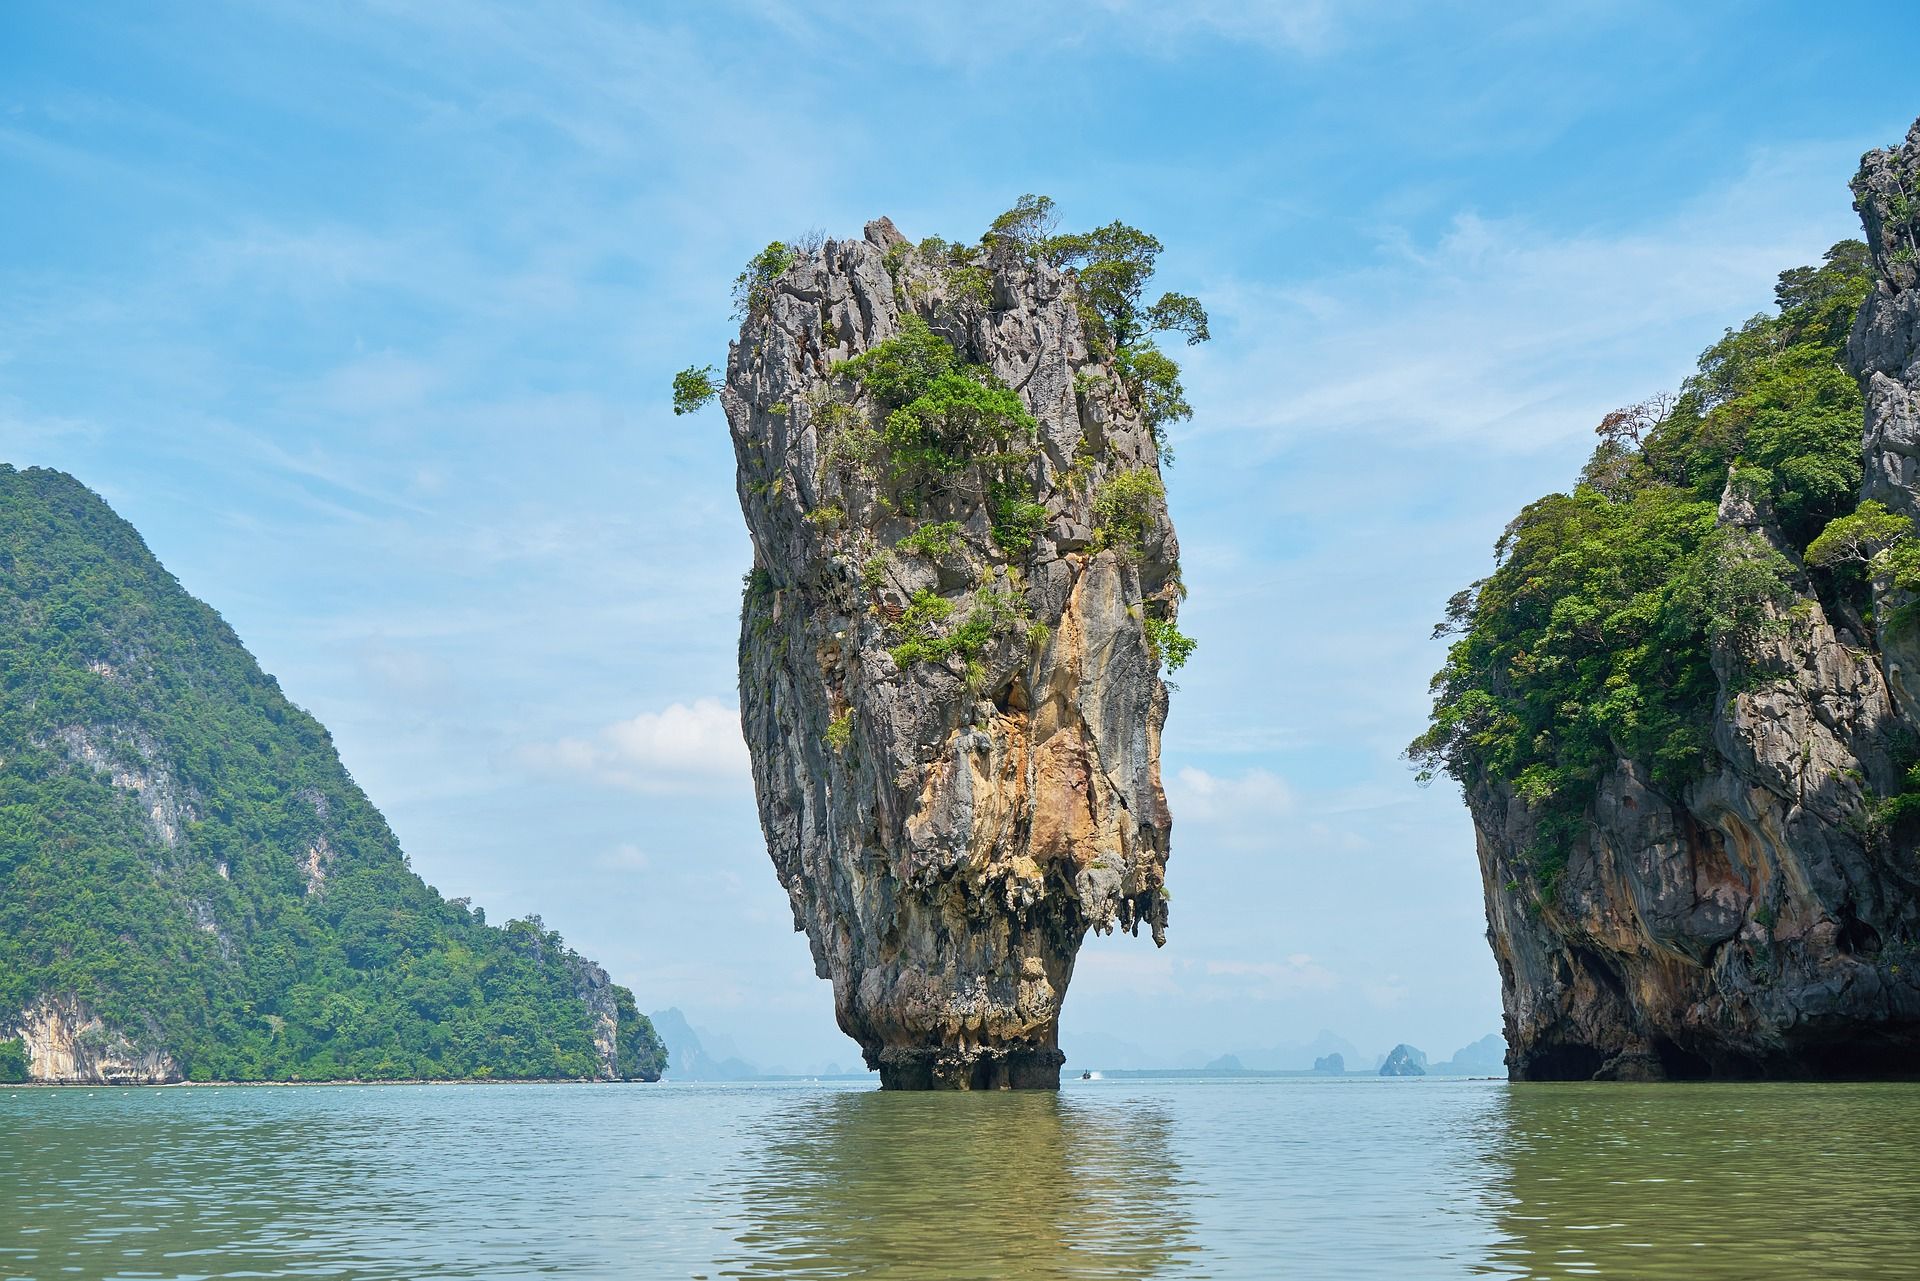 Khao Phing Kan popularly known as James Bond Island in Thailand